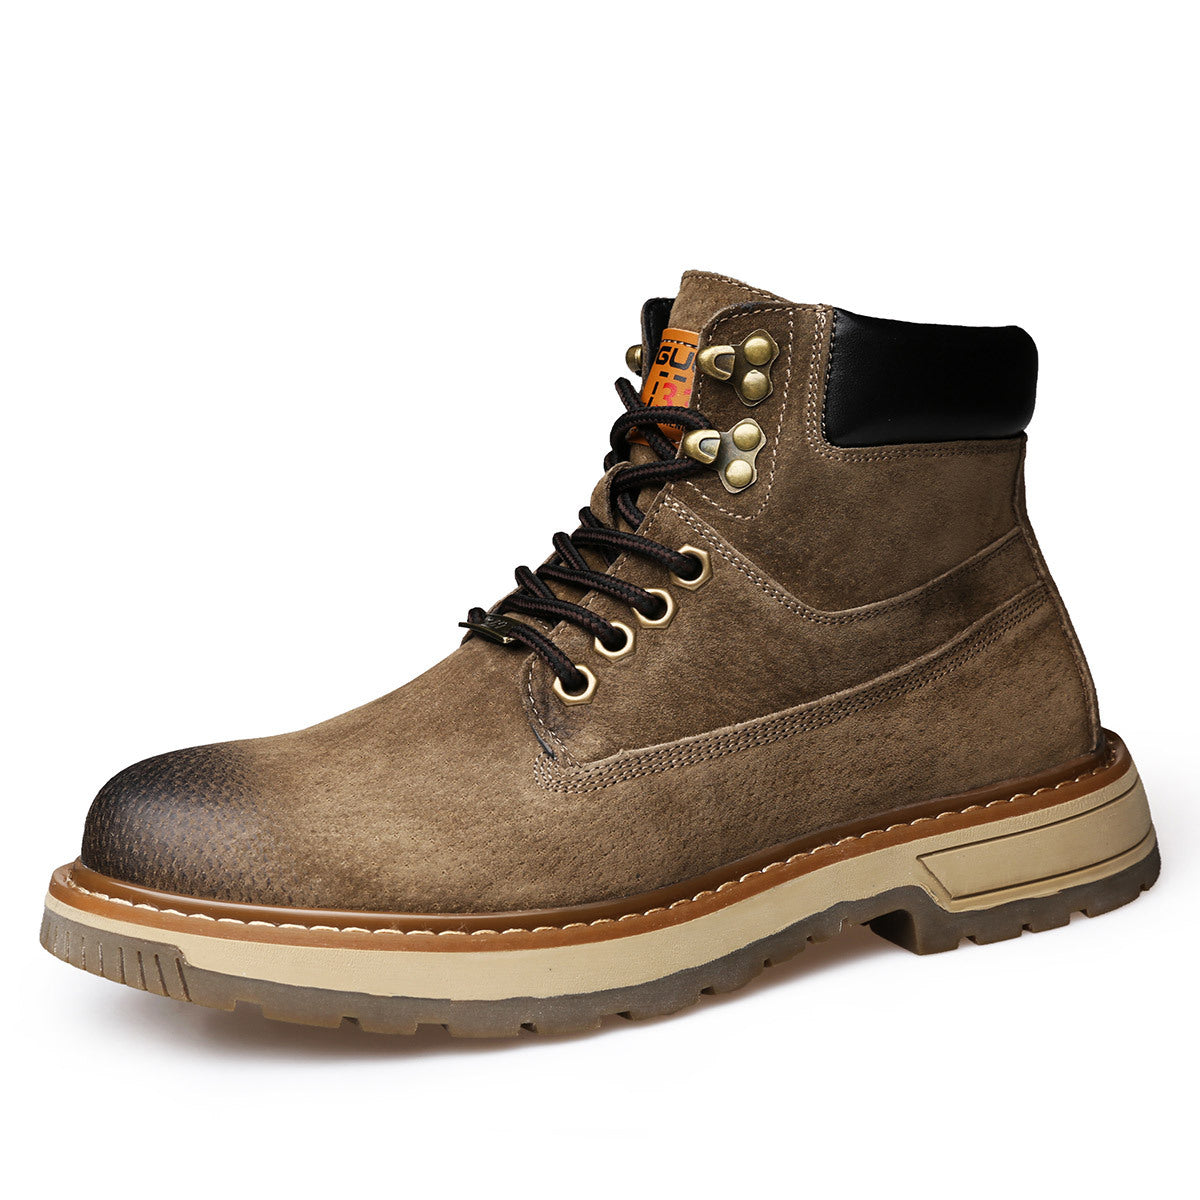 Men's Frosted Breathable Neri Martin Boots